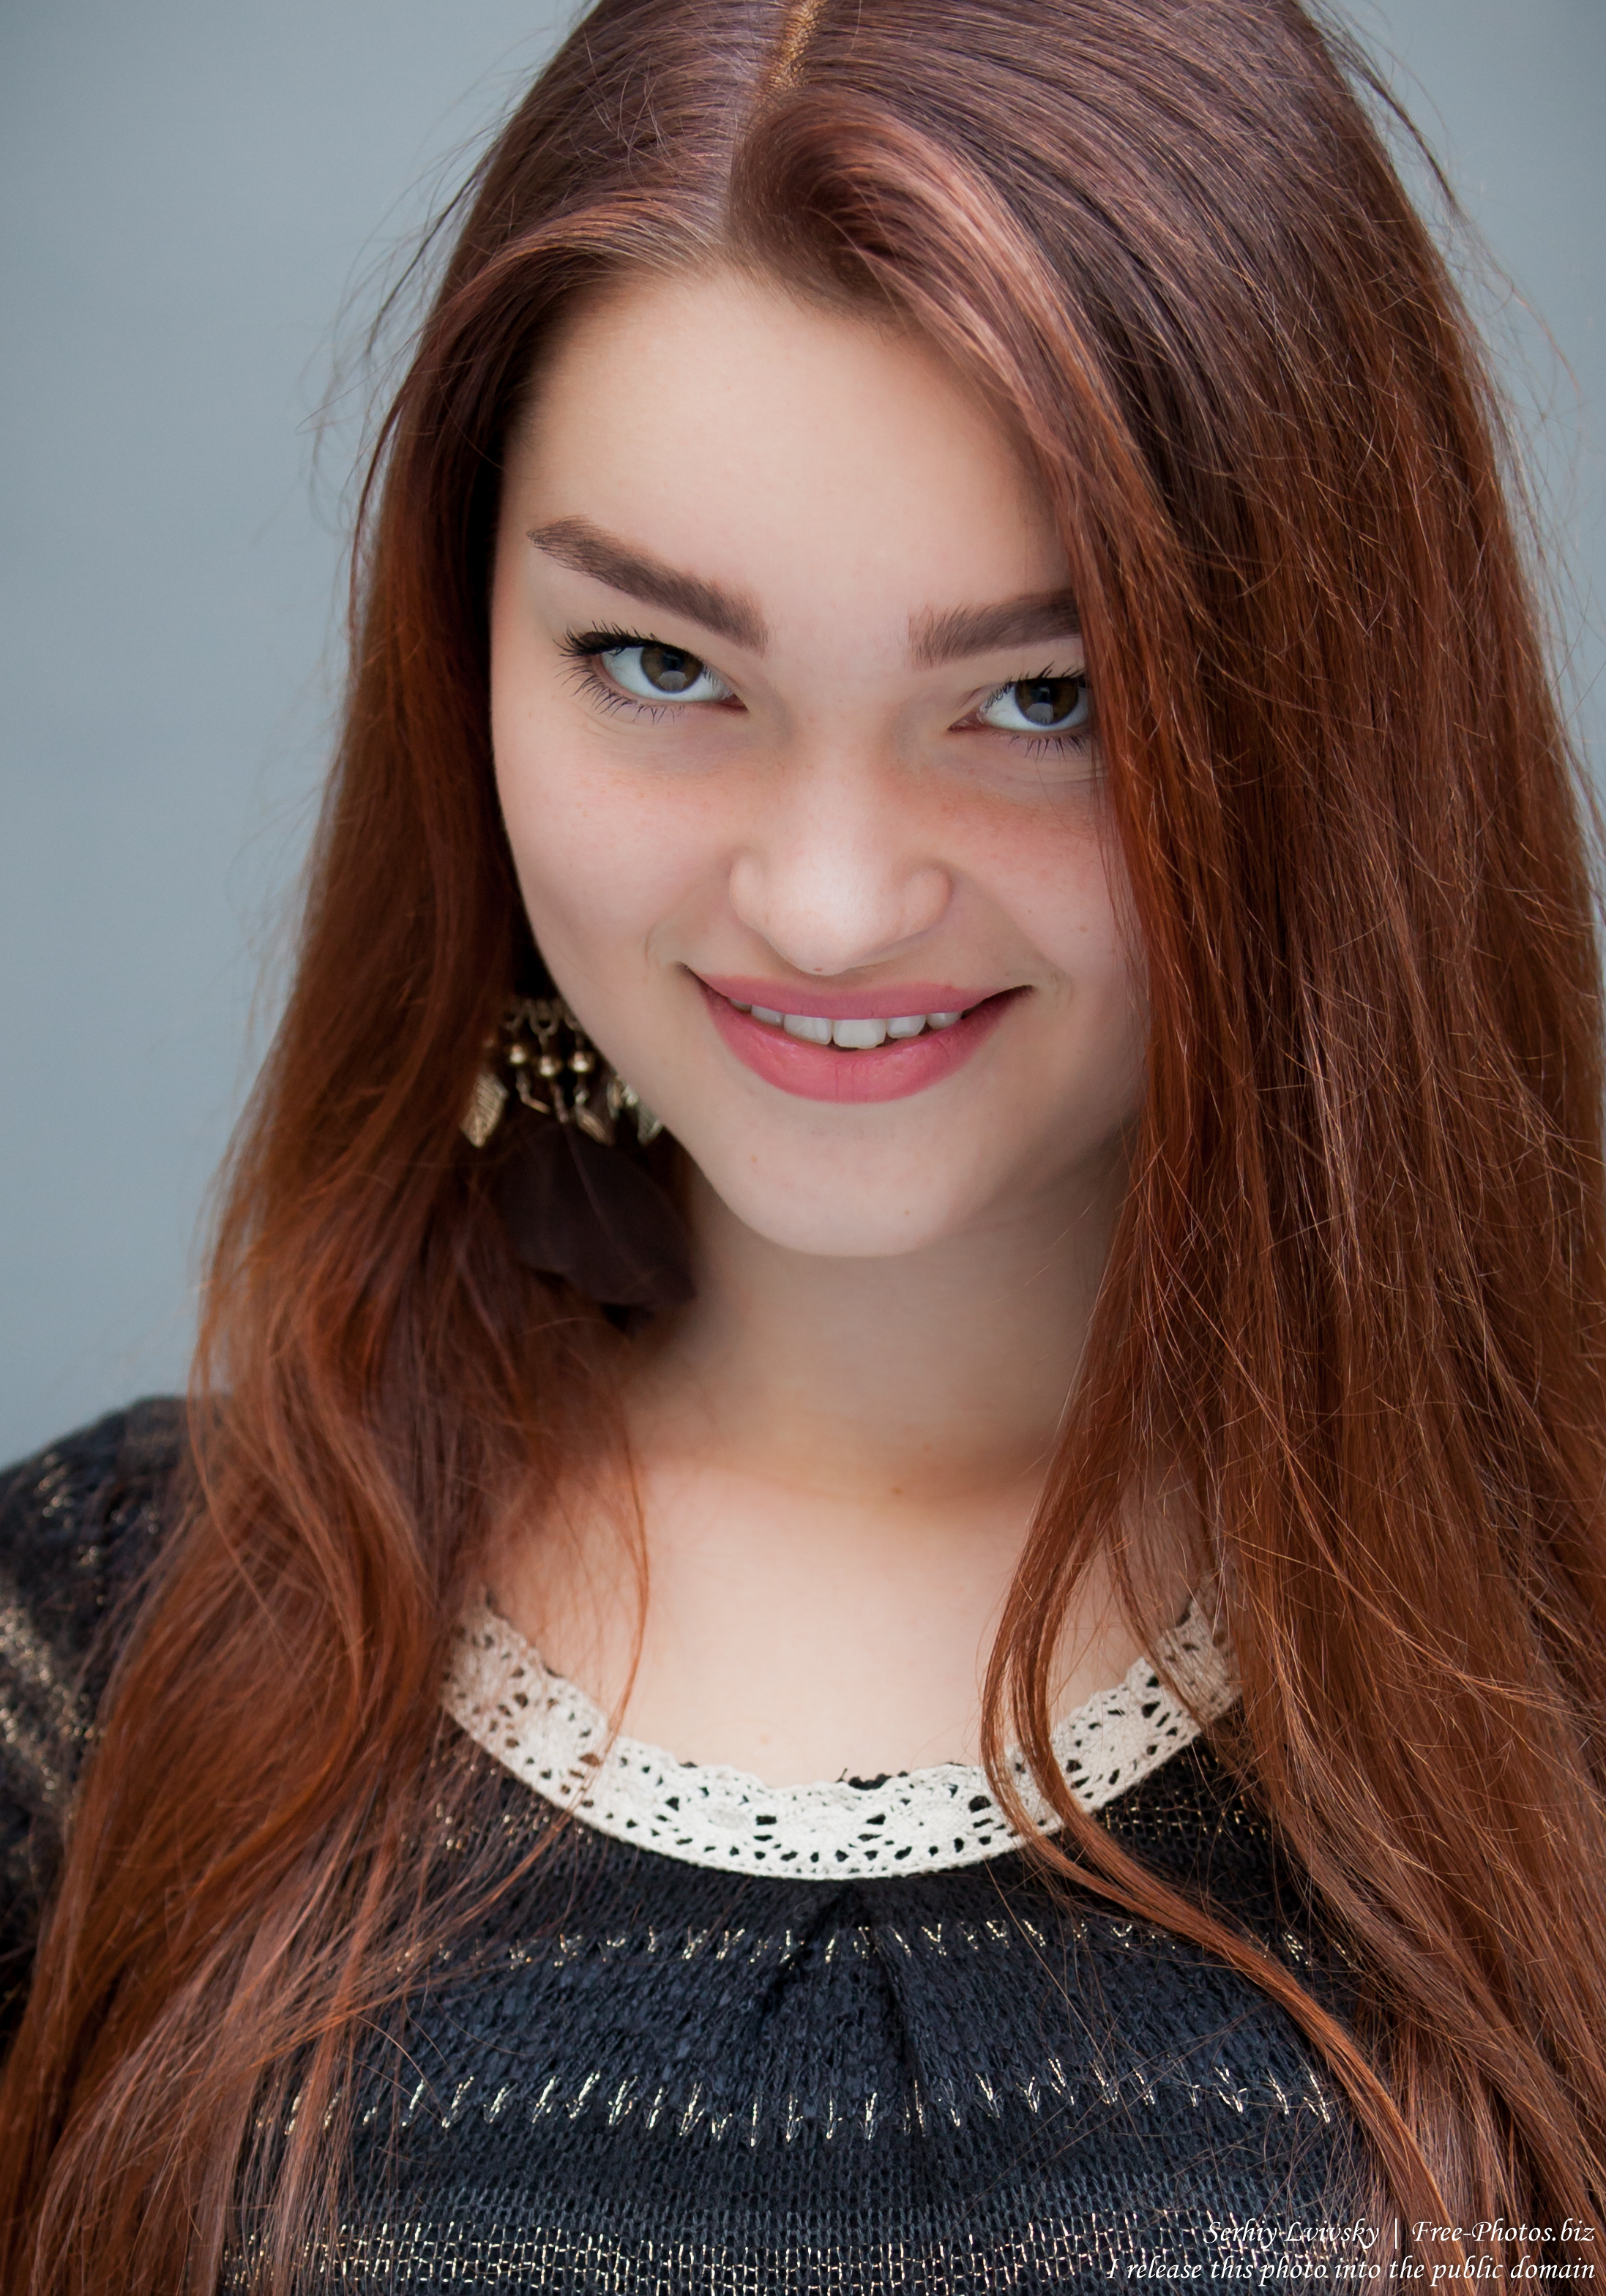 an 18-year-old girl photographed by Serhiy Lvivsky in October 2015, picture 7